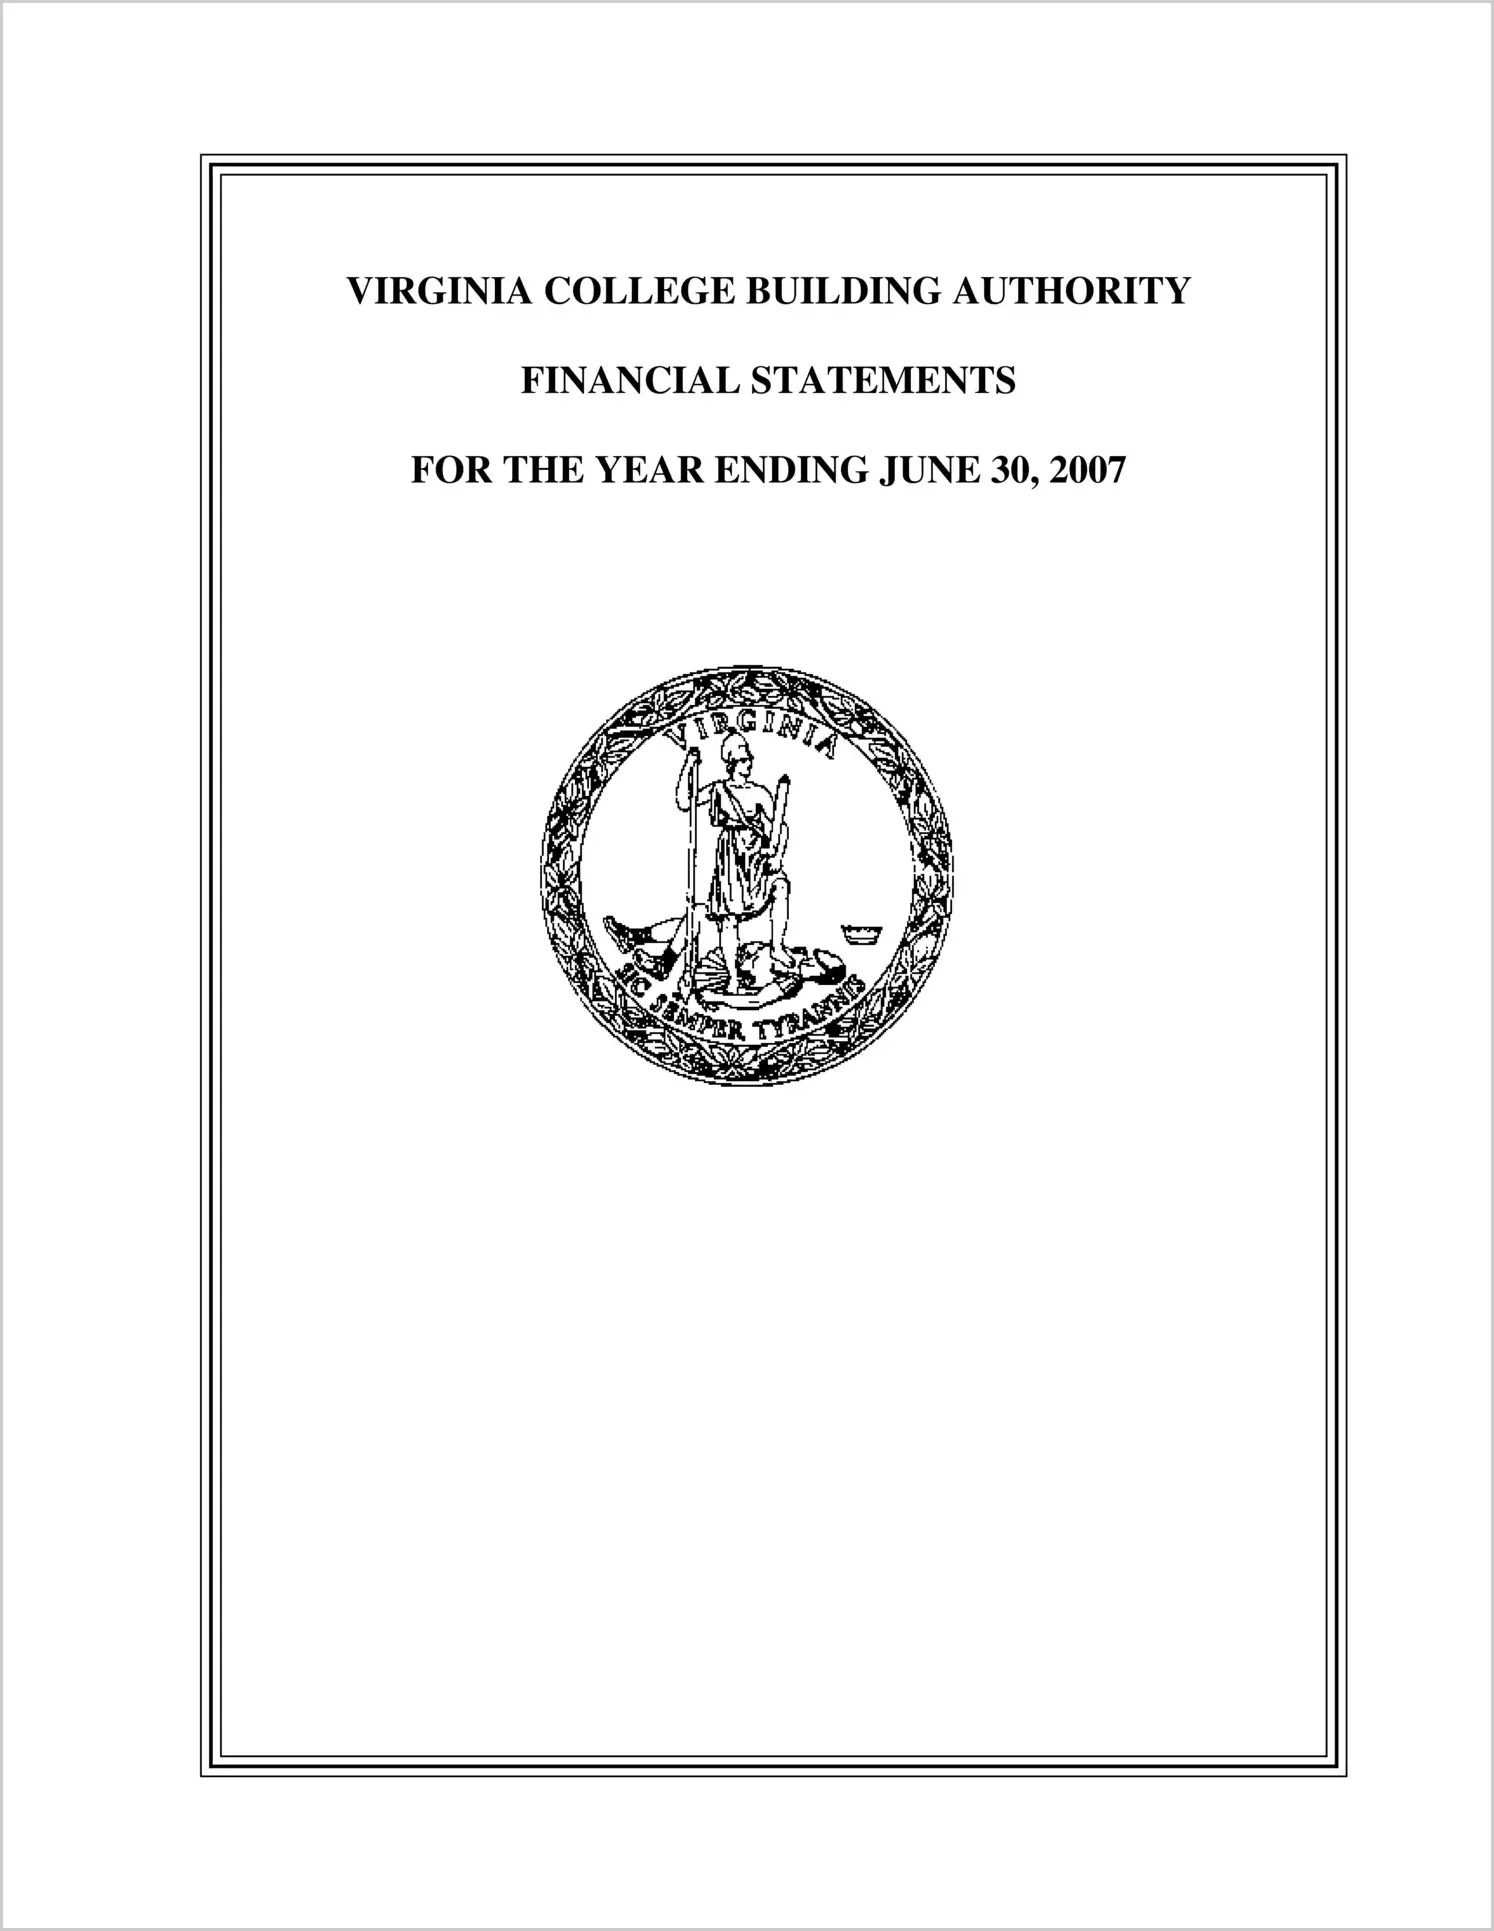 Virginia College Building Authority Financial Statements for the year ended June 30, 2007